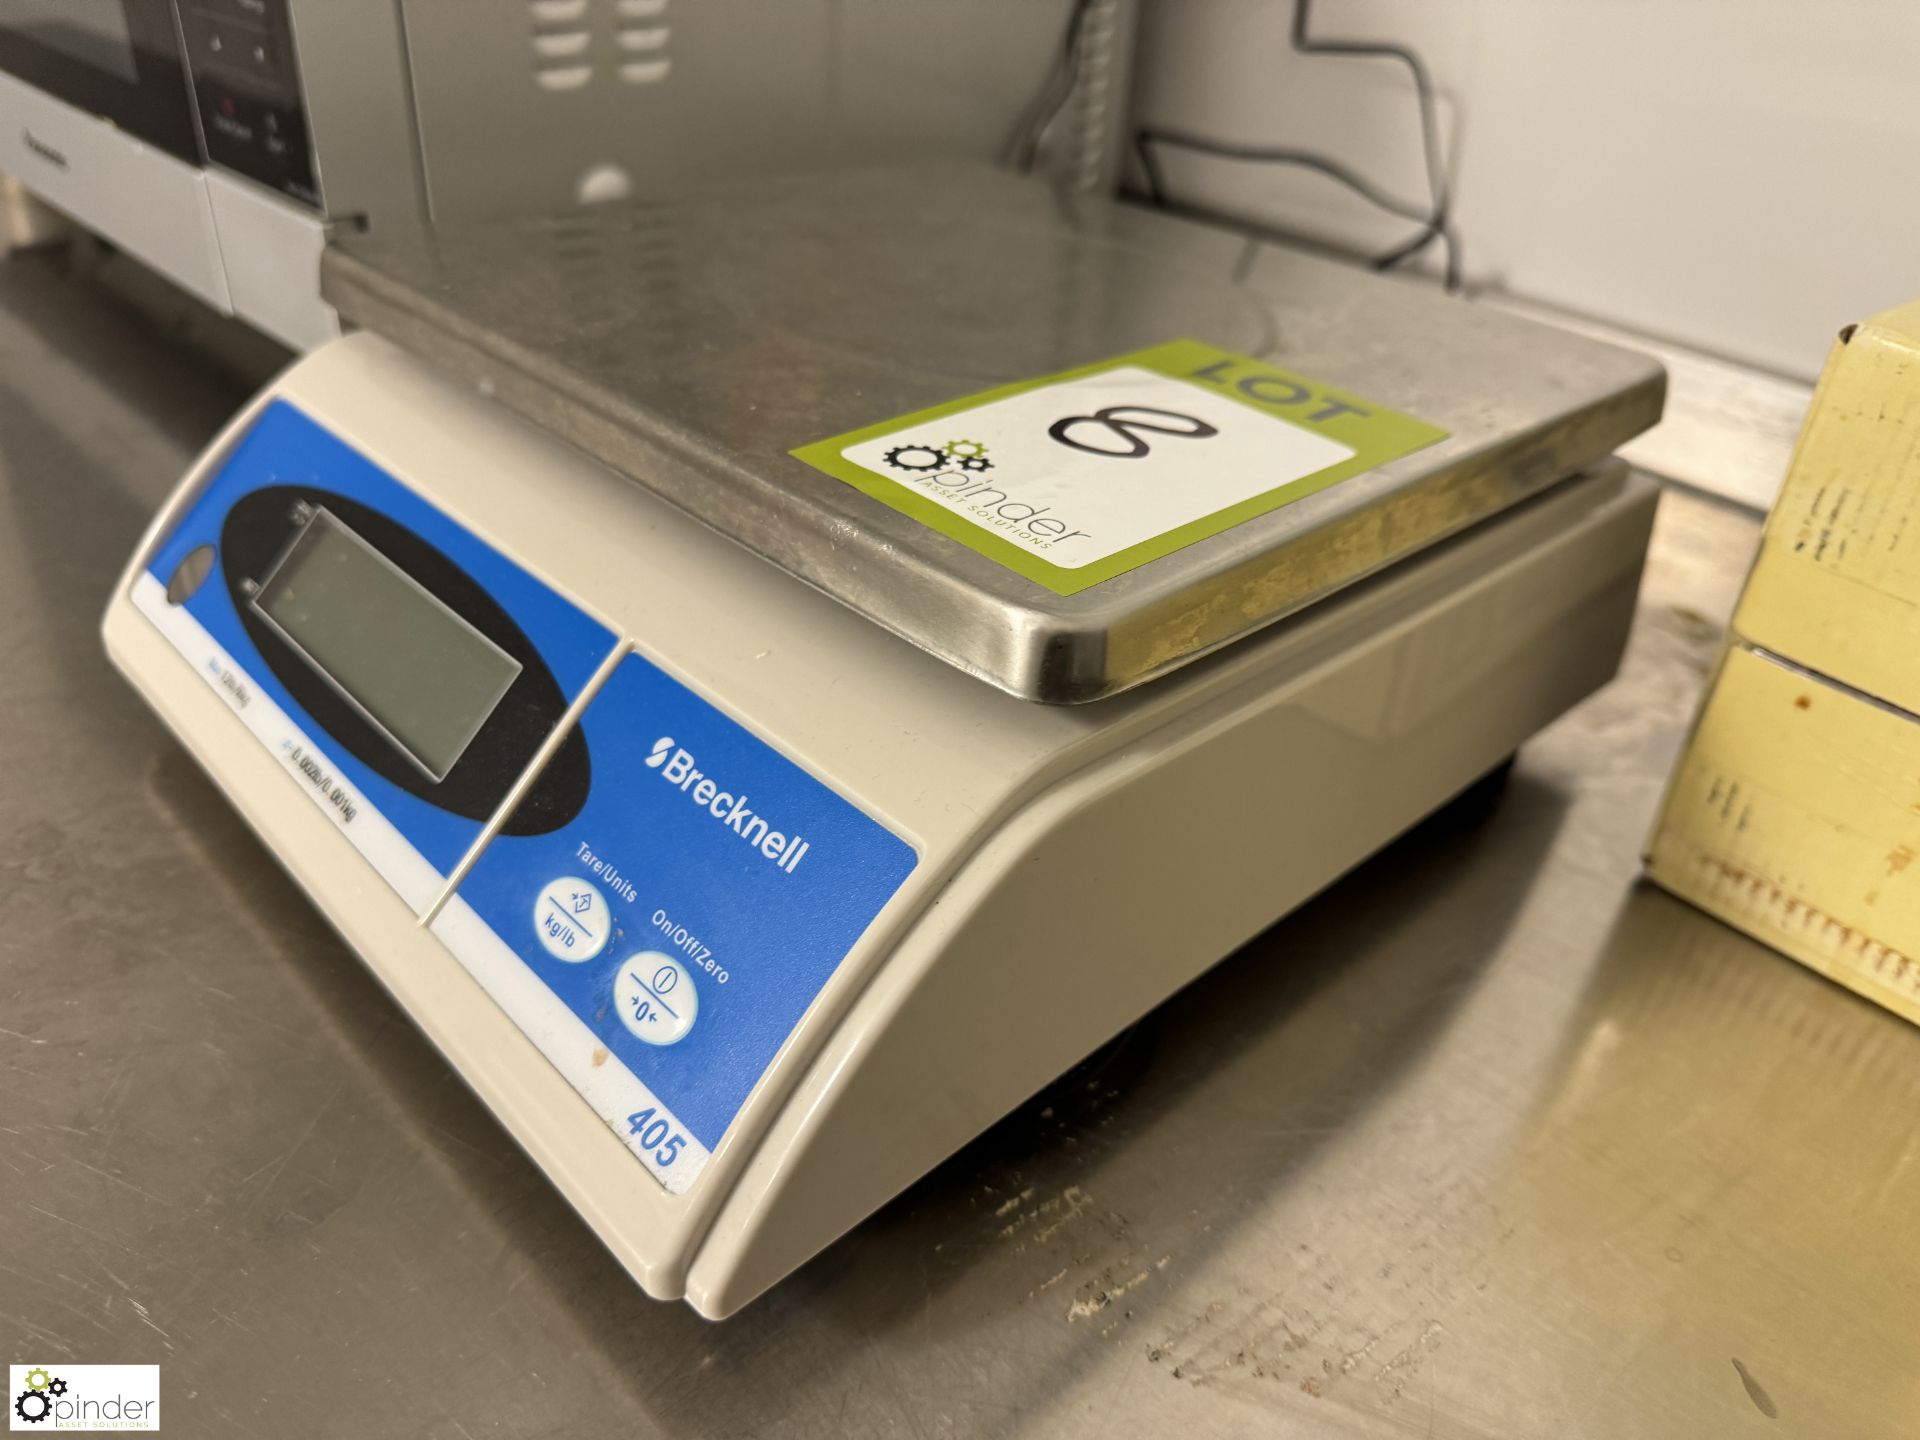 Brecknall 405 Digital Weigh Scales, 6kg x 0.001kg, 240volts (location in building – basement kitchen - Image 2 of 3